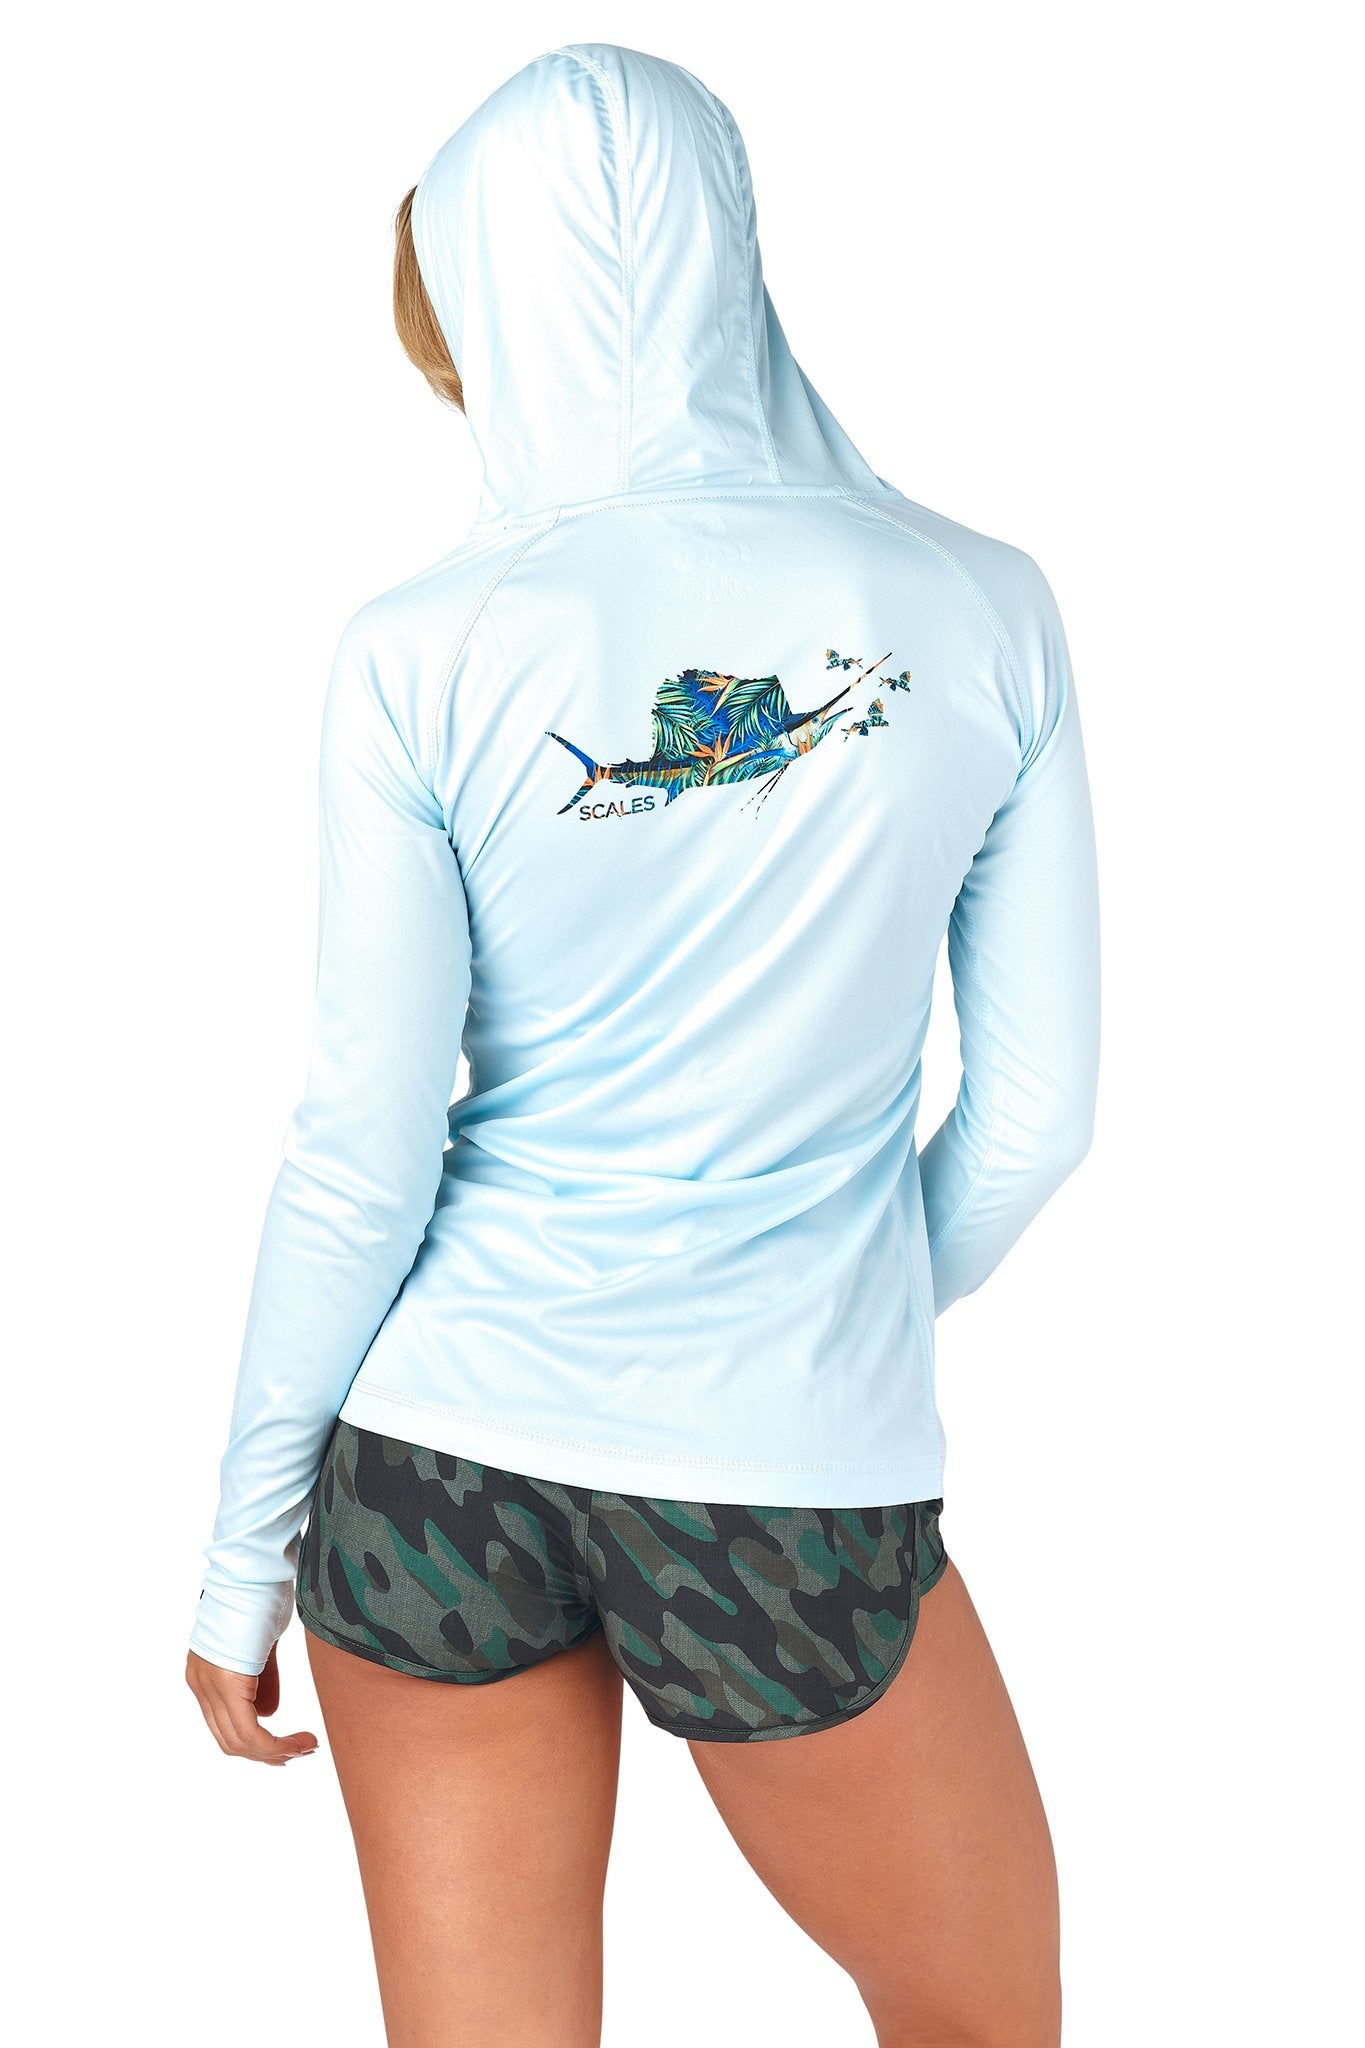 Scales Fly Sail Pro Performance Hoodie in Light Blue Size L